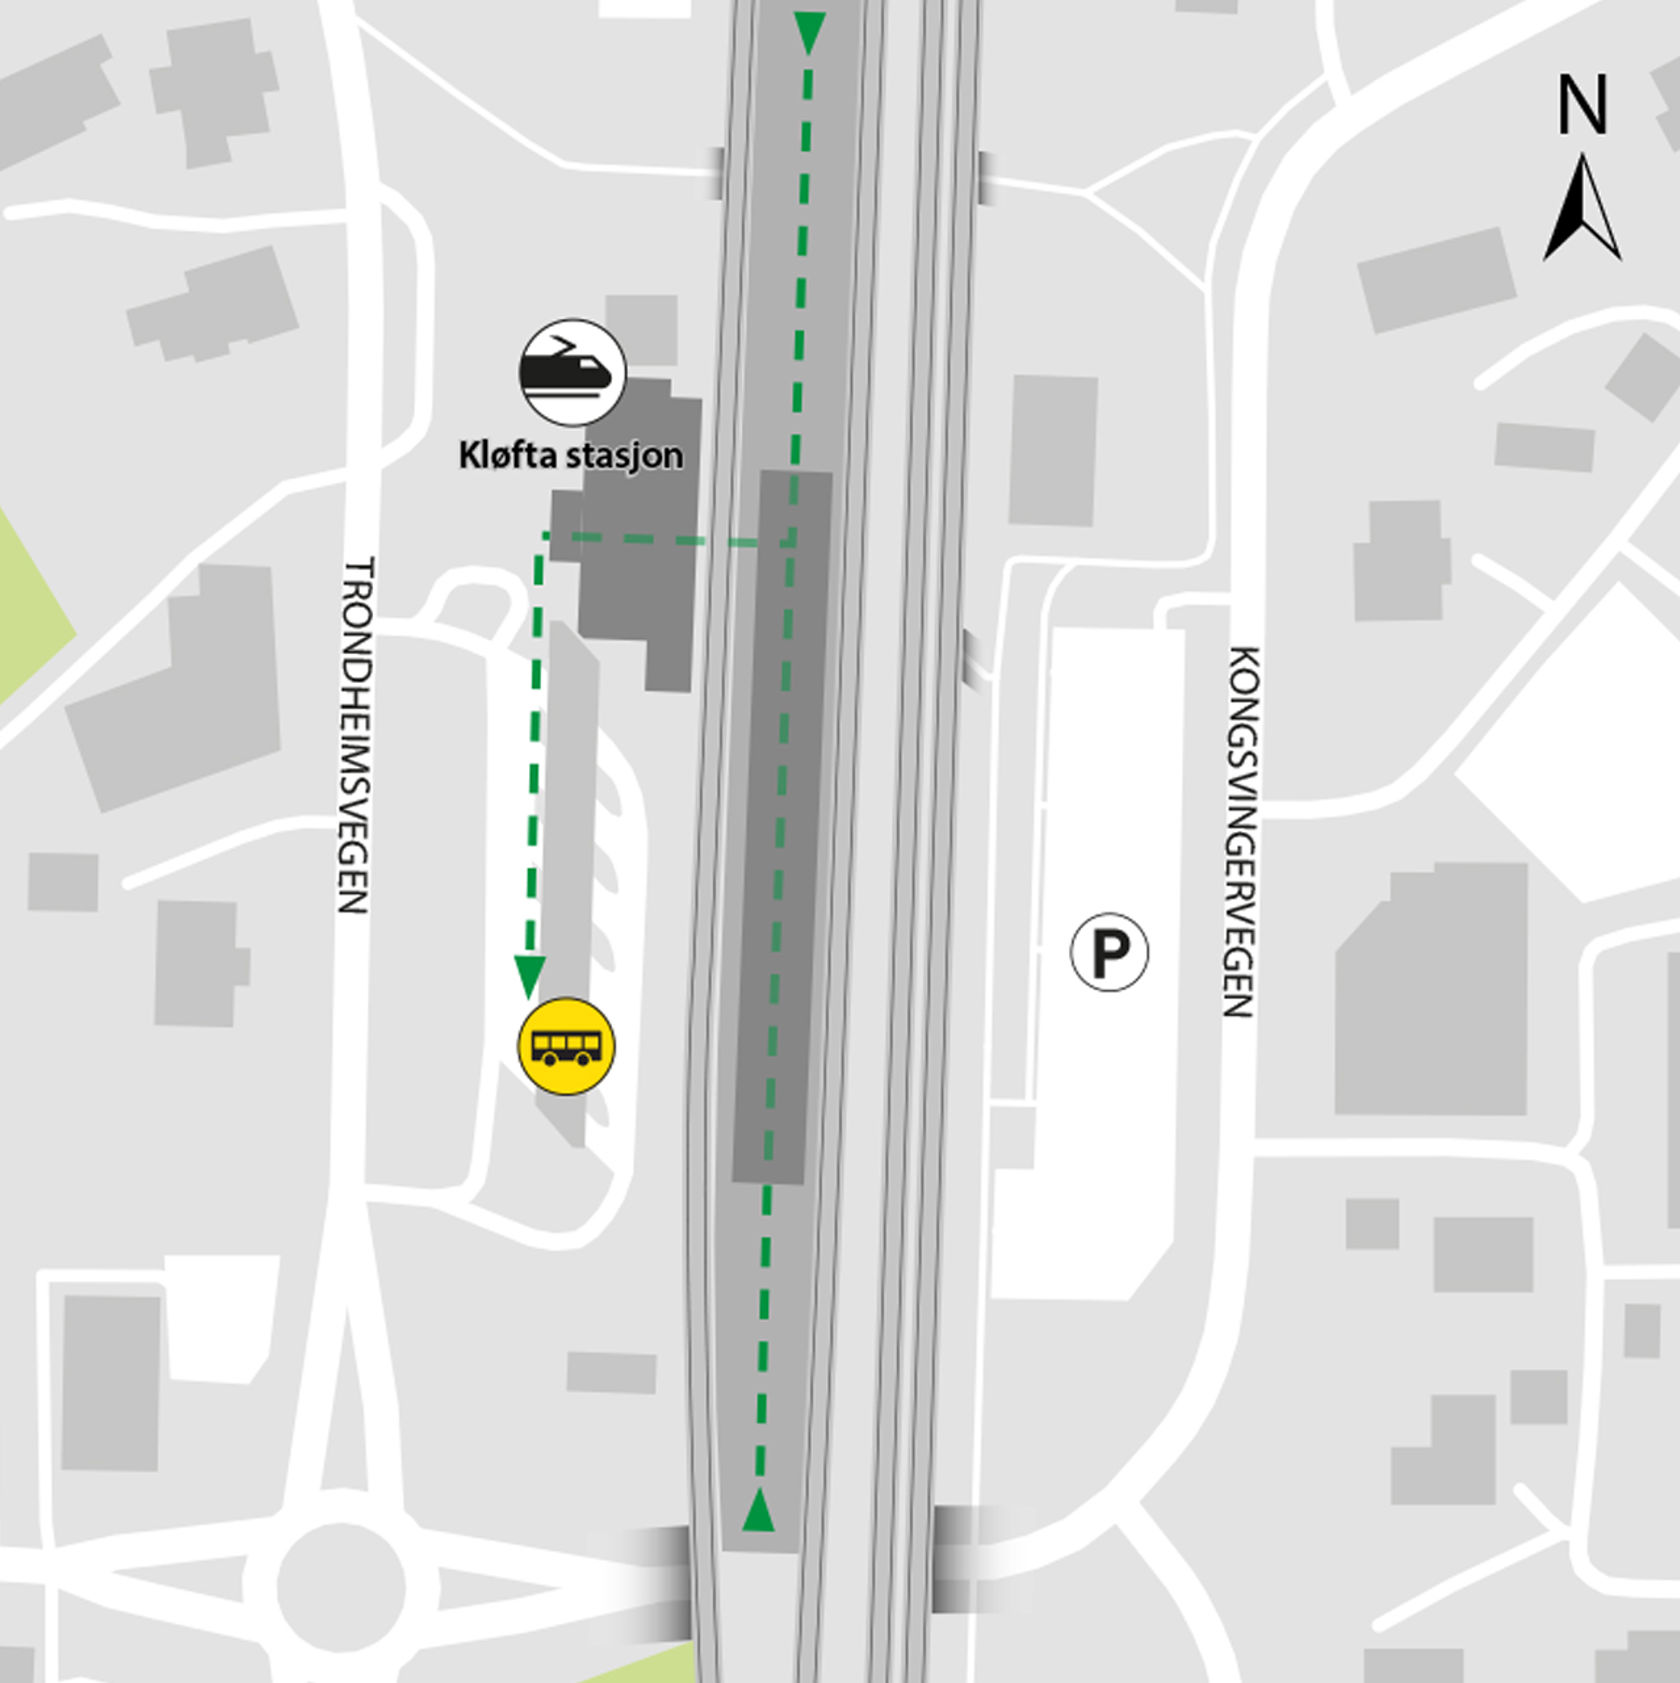 Map shows rail replacement service departs from bus stop at Kløfta stasjon, platform 5 and 6.